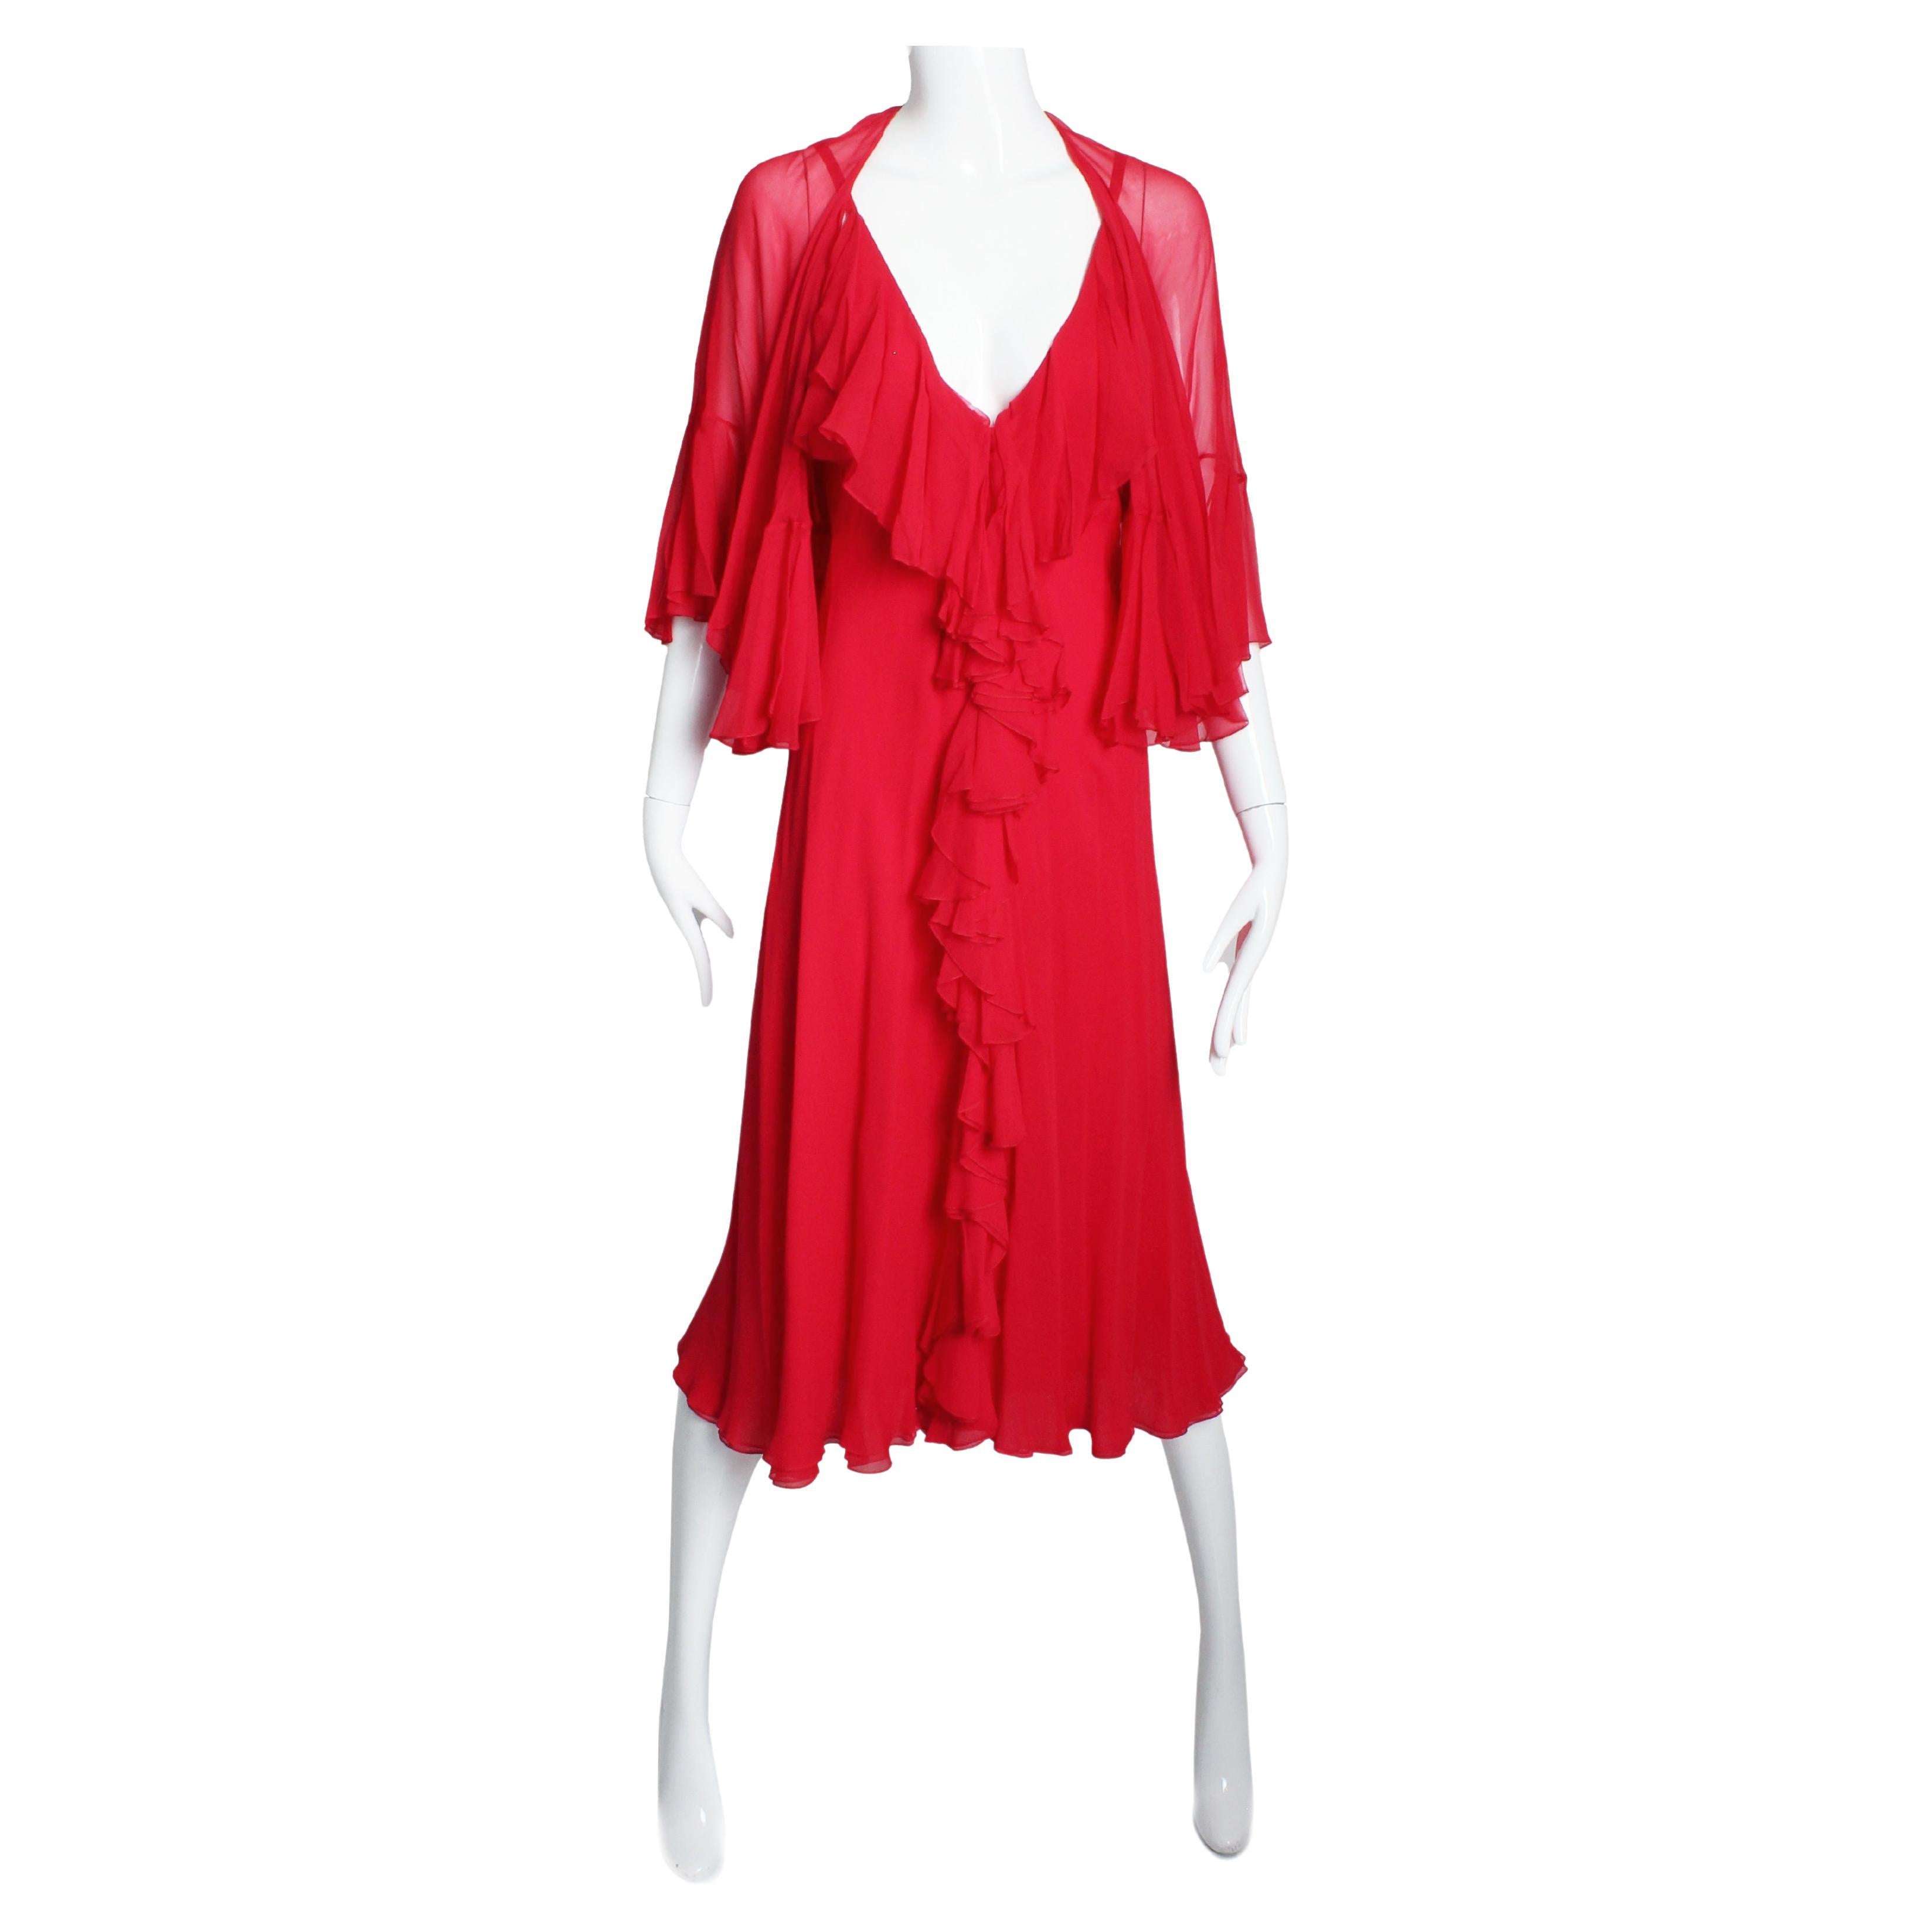 Pauline Trigere Dress and Shawl 2pc Set Red Silk Chiffon Loose Ruffles Vintage For Sale